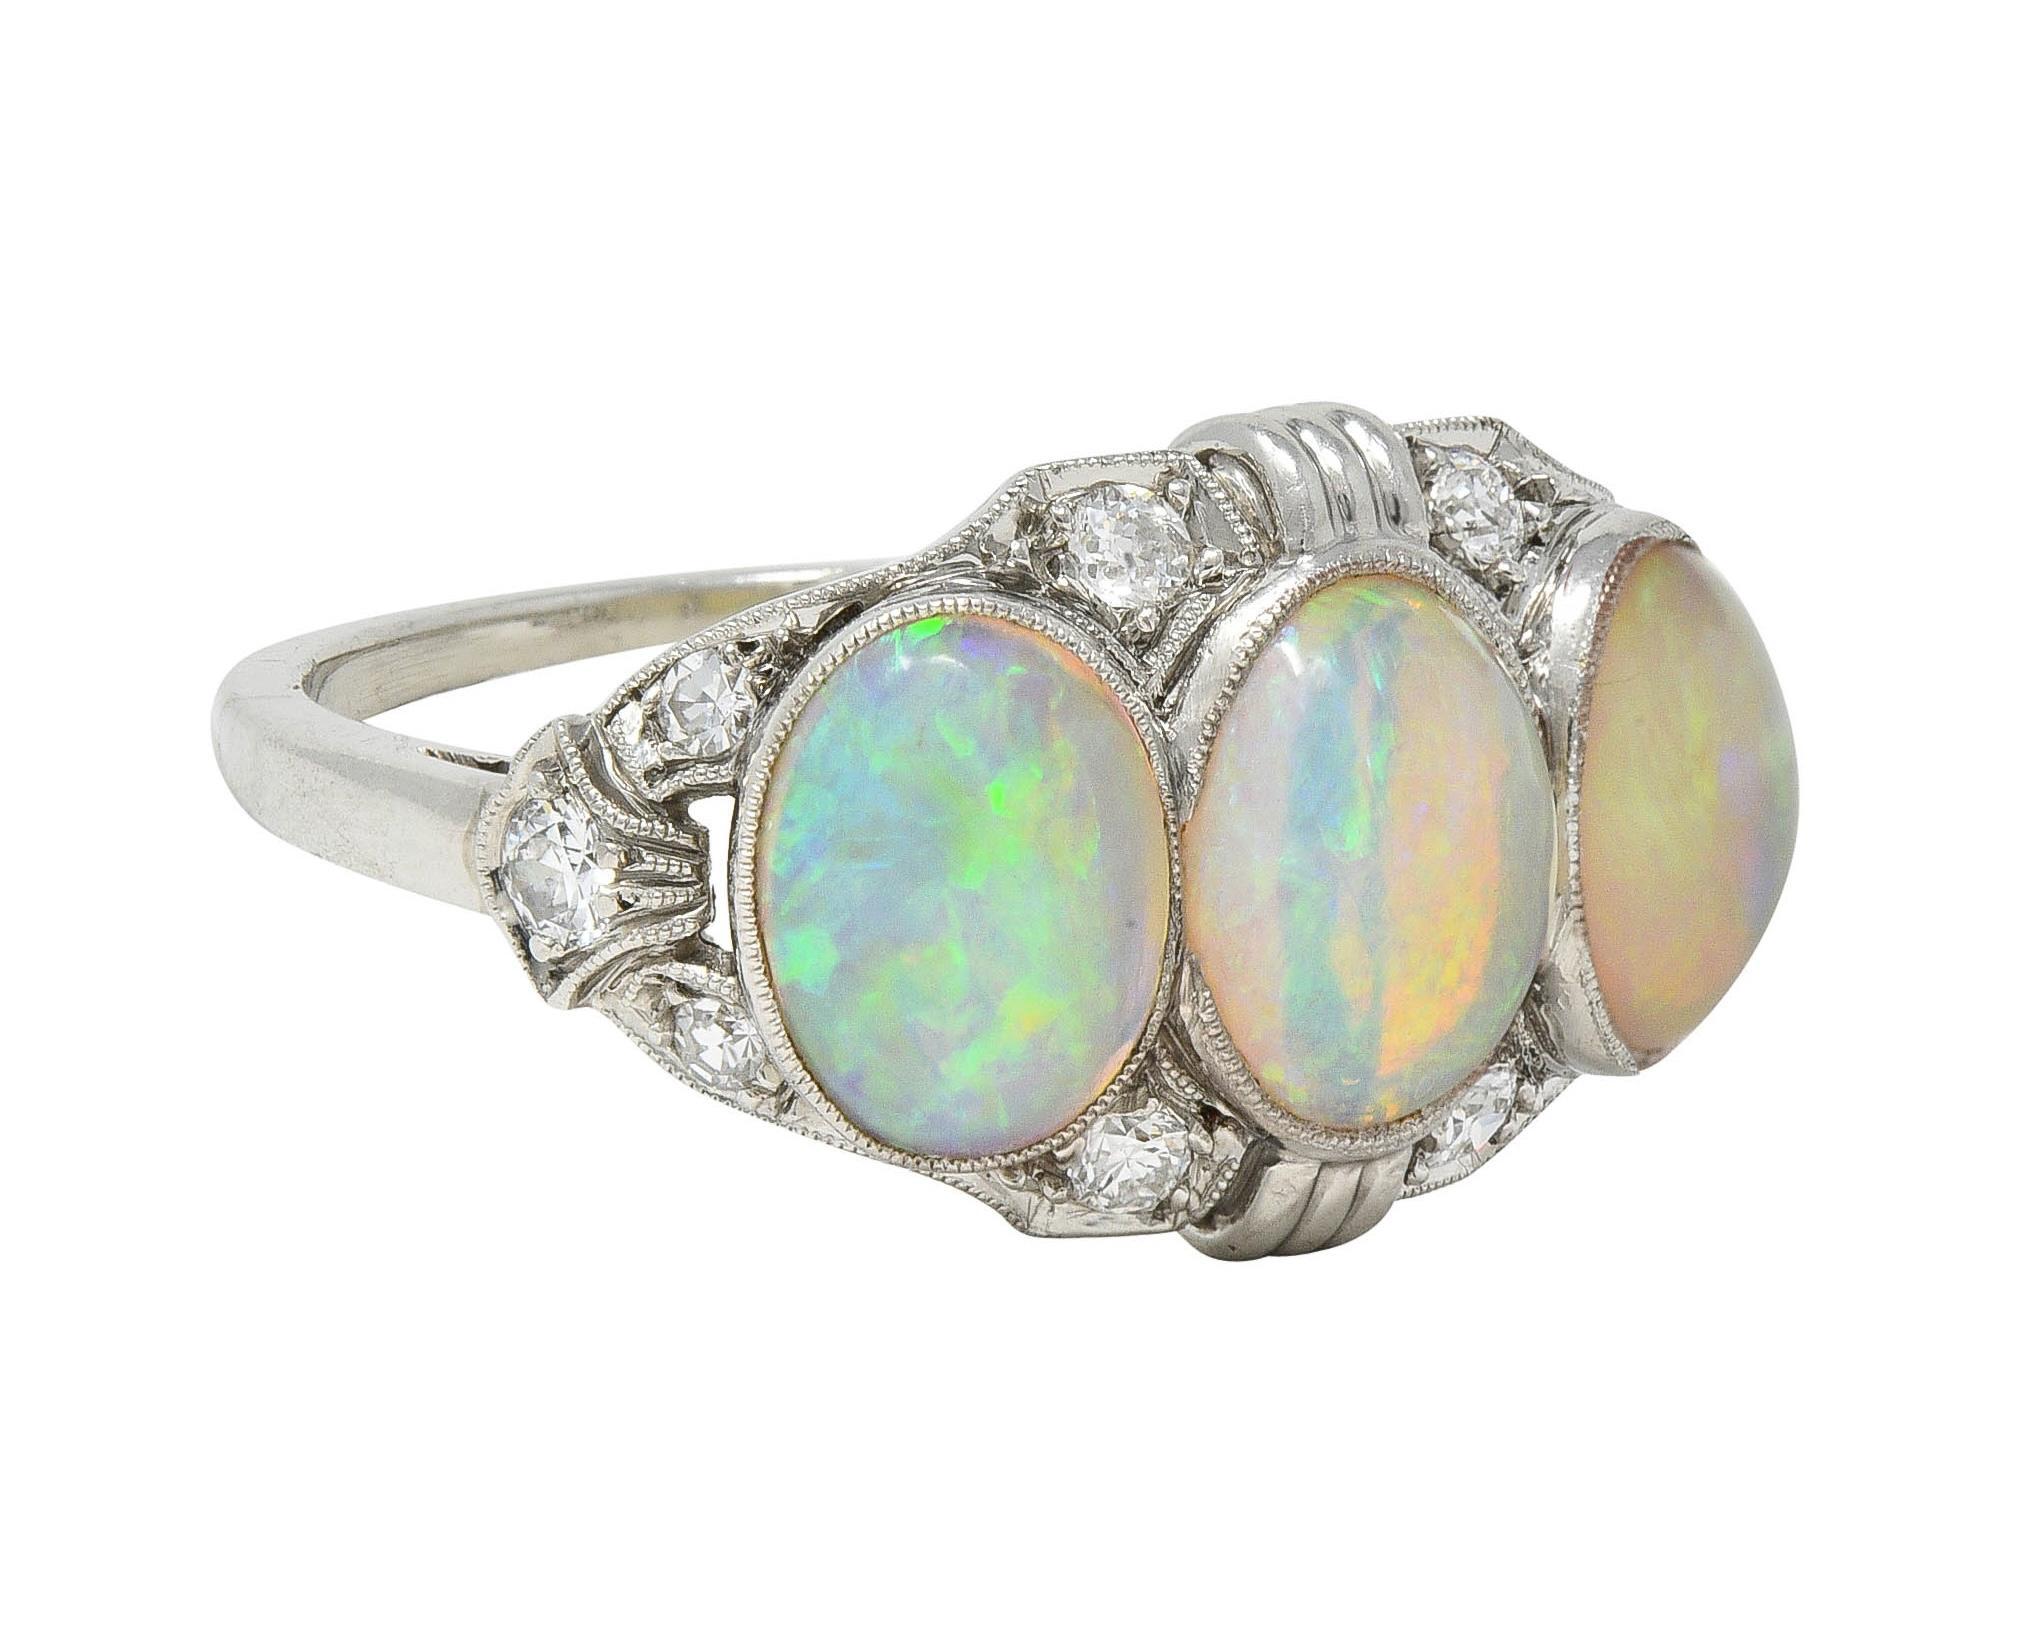 Featuring three oval-shaped opal cabochons bezel set east to west
Ranging in size from 5.0 x 7.0 mm to 6.0 x 8.0 mm
Translucent white body color with spectral play-of-color
Accented by single cut diamonds bead set throughout
Weighing approximately